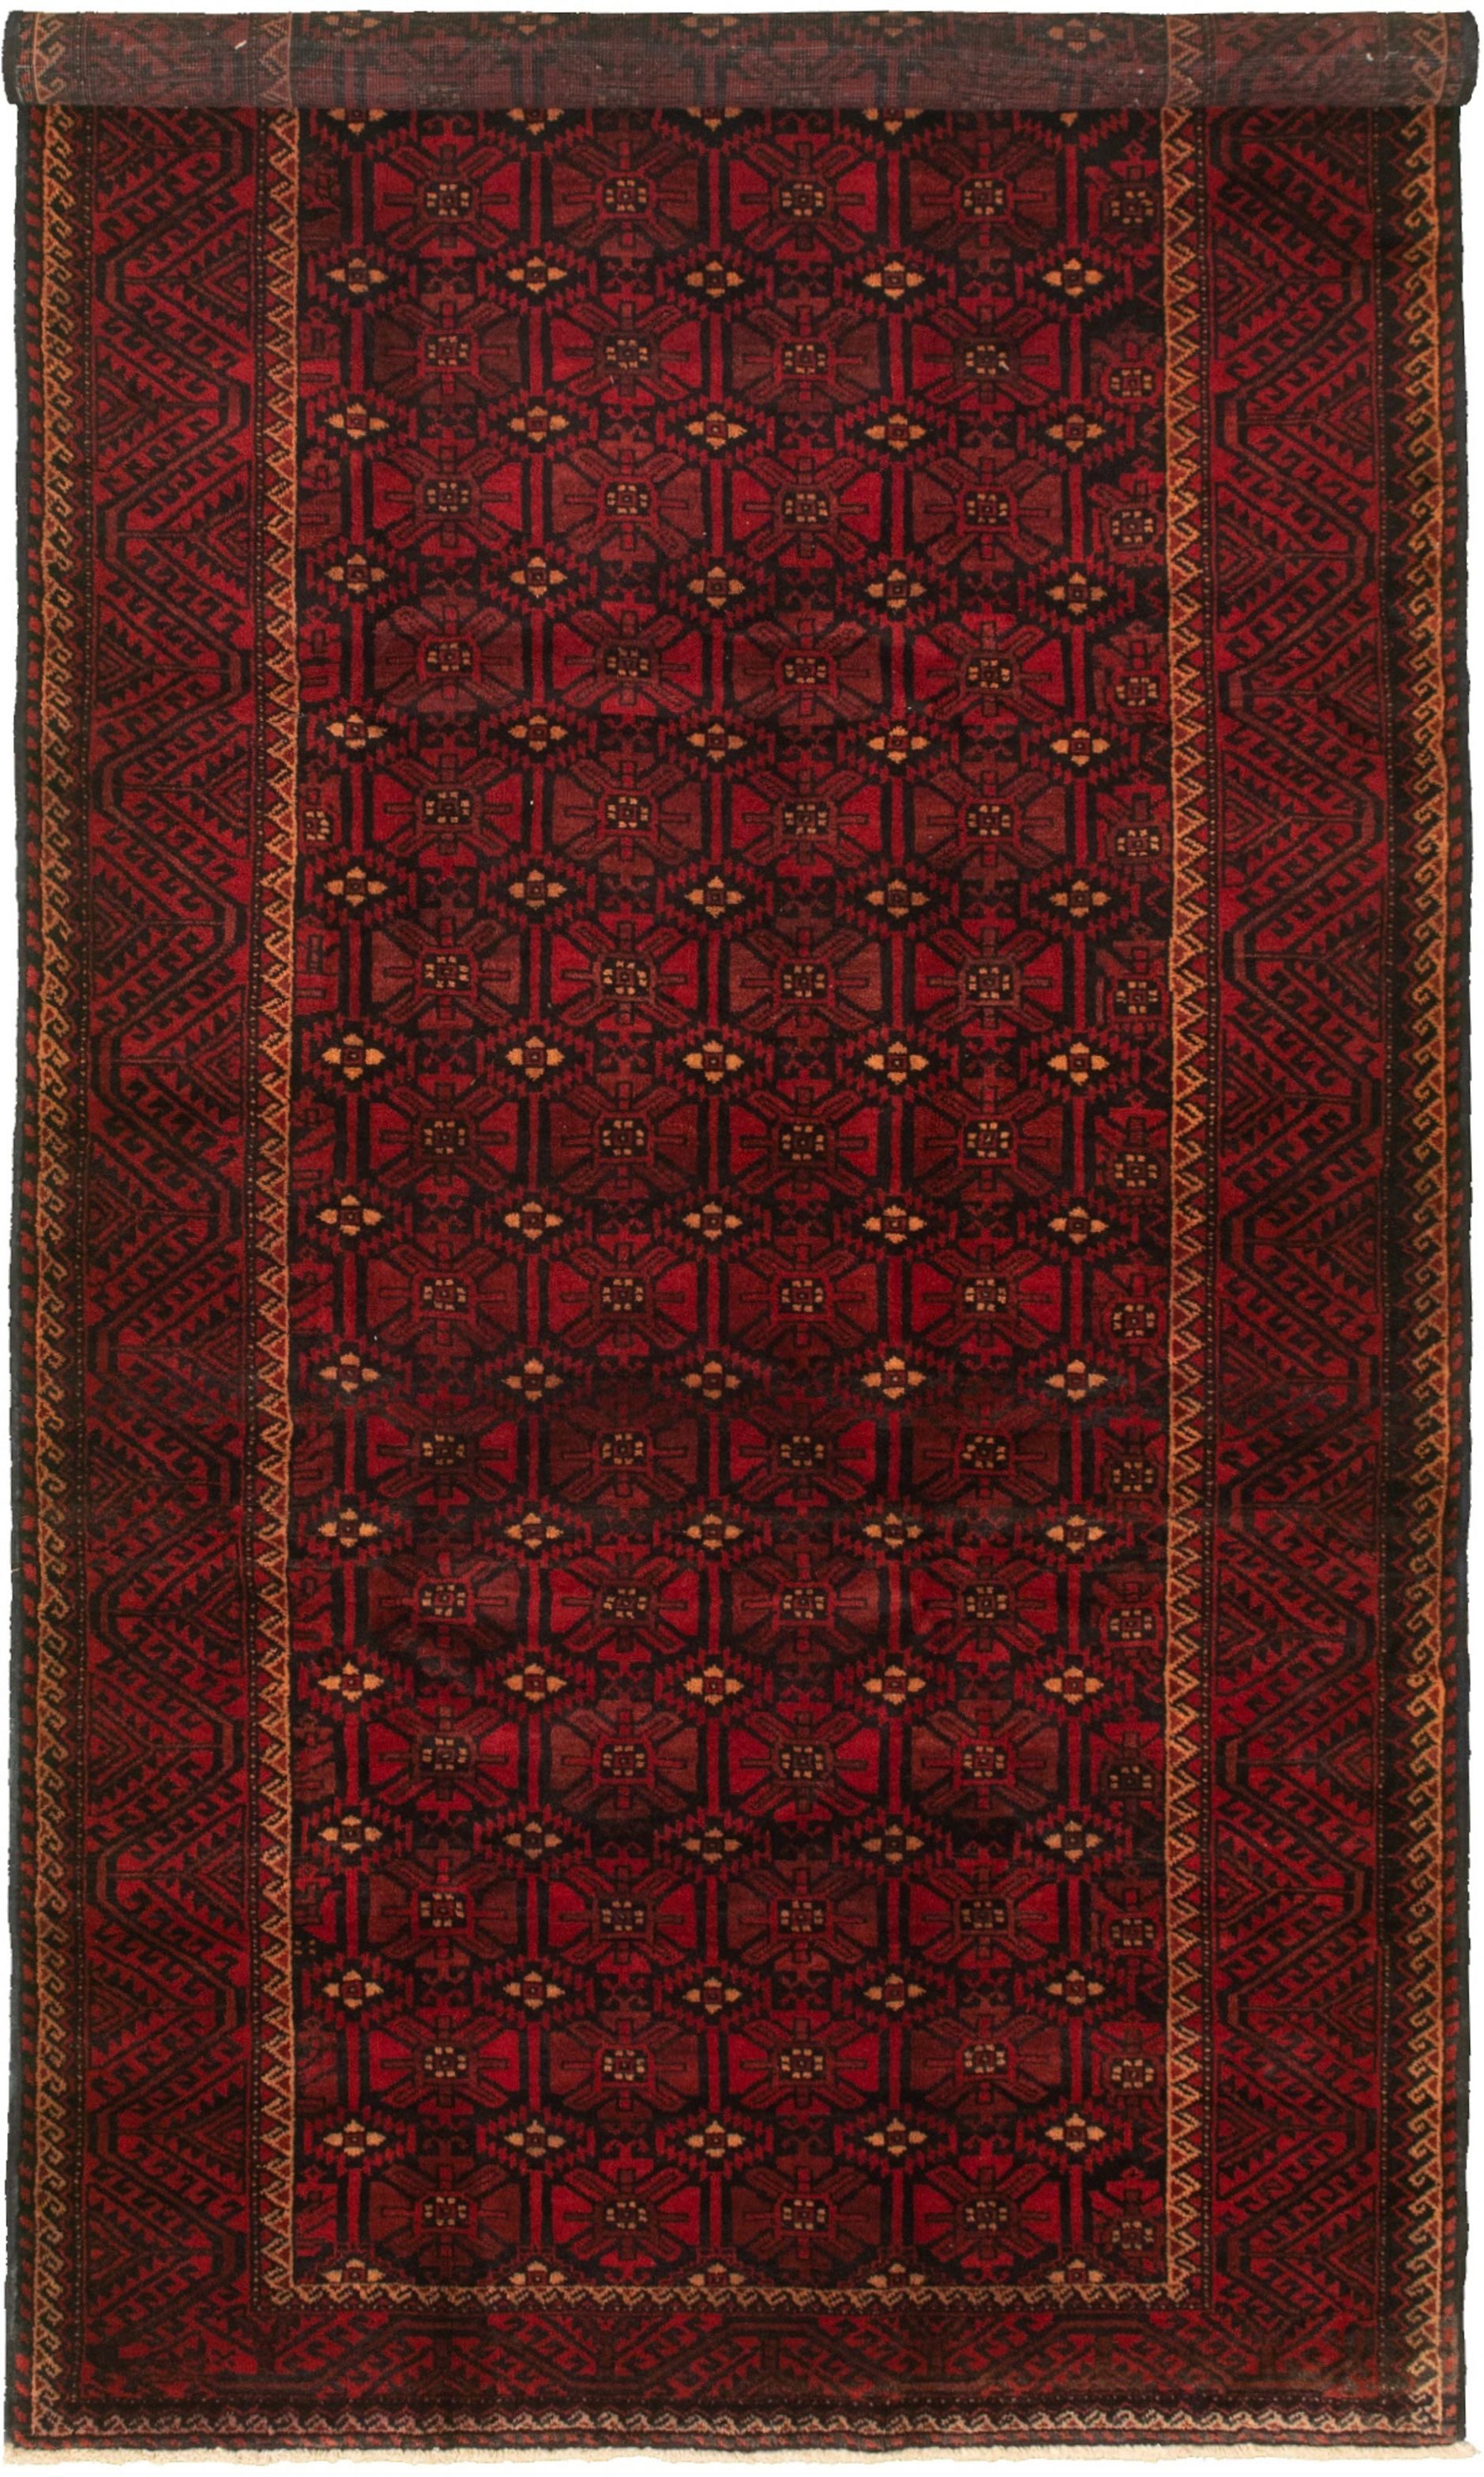 Hand-knotted Authentic Turkish Red Wool Rug 5'2" x 11'2" Size: 5'2" x 11'2"  